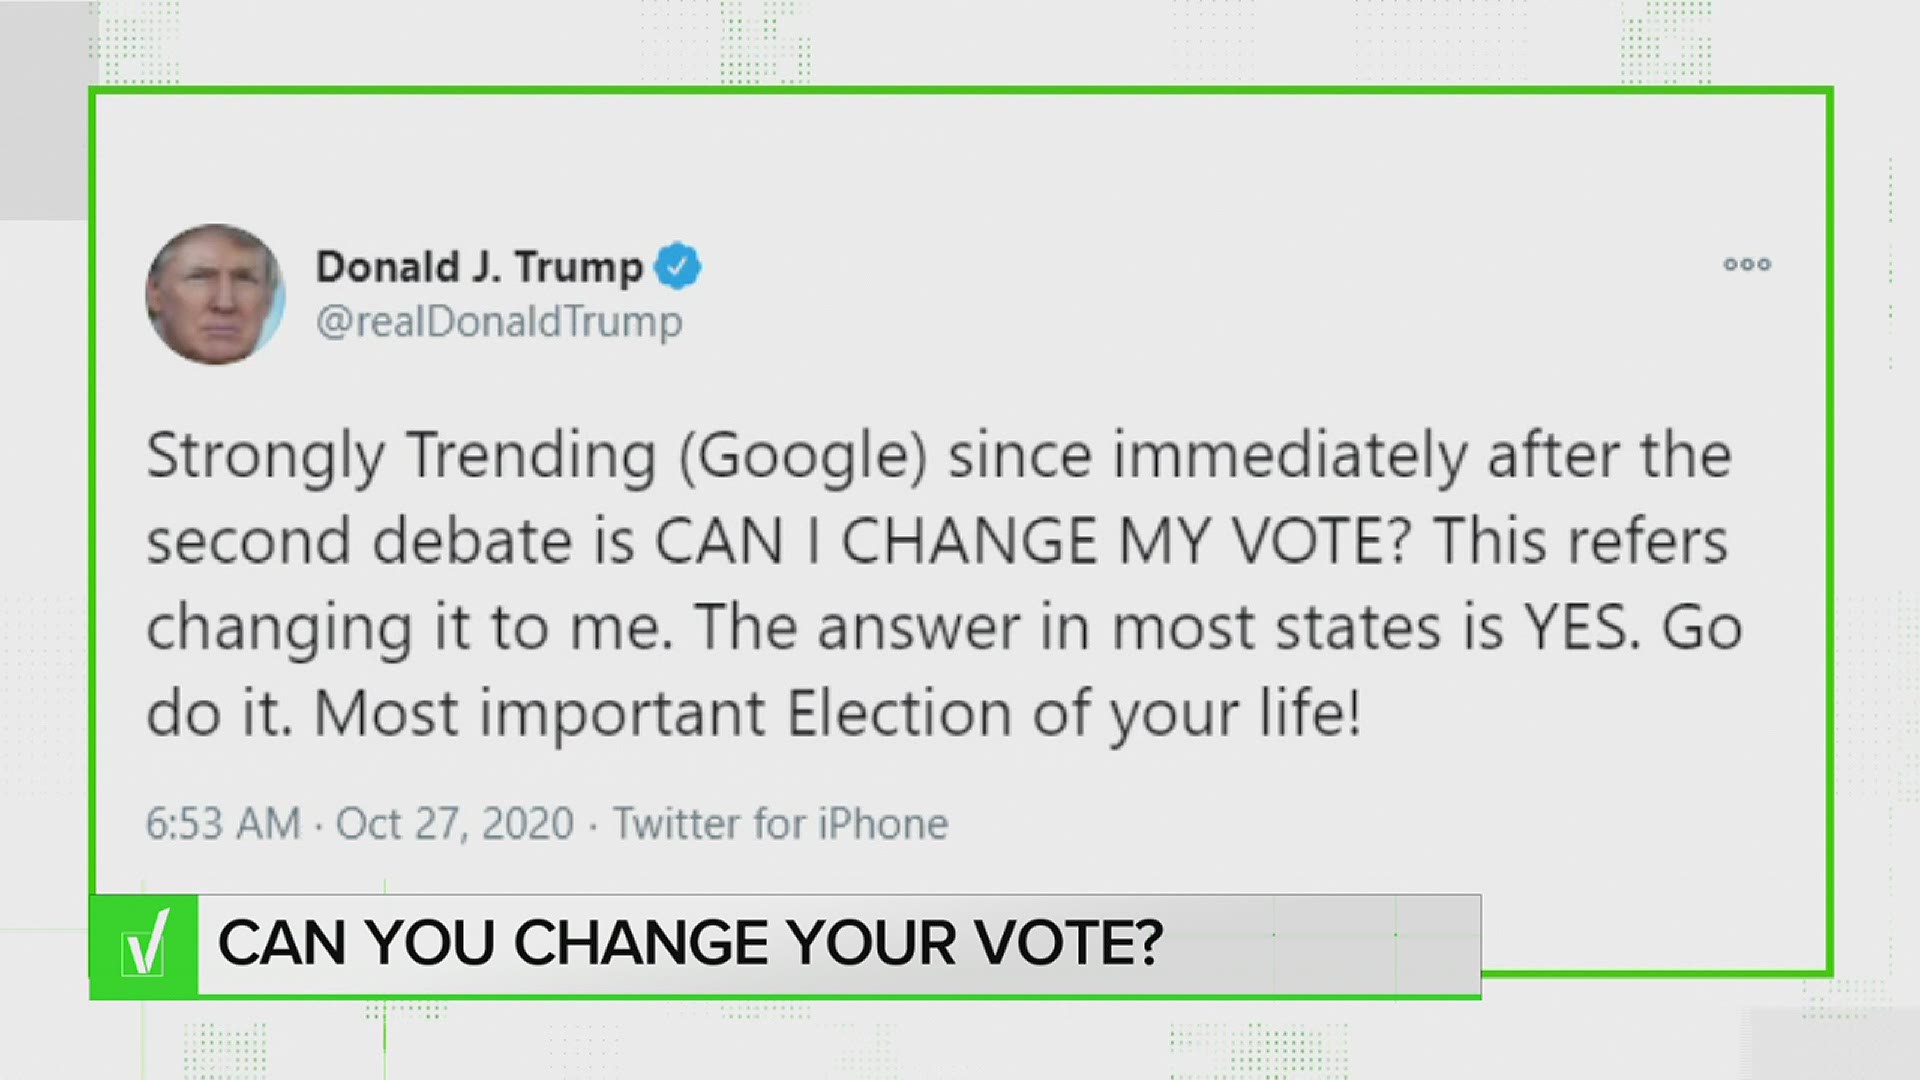 VERIFY: Can you change your vote?